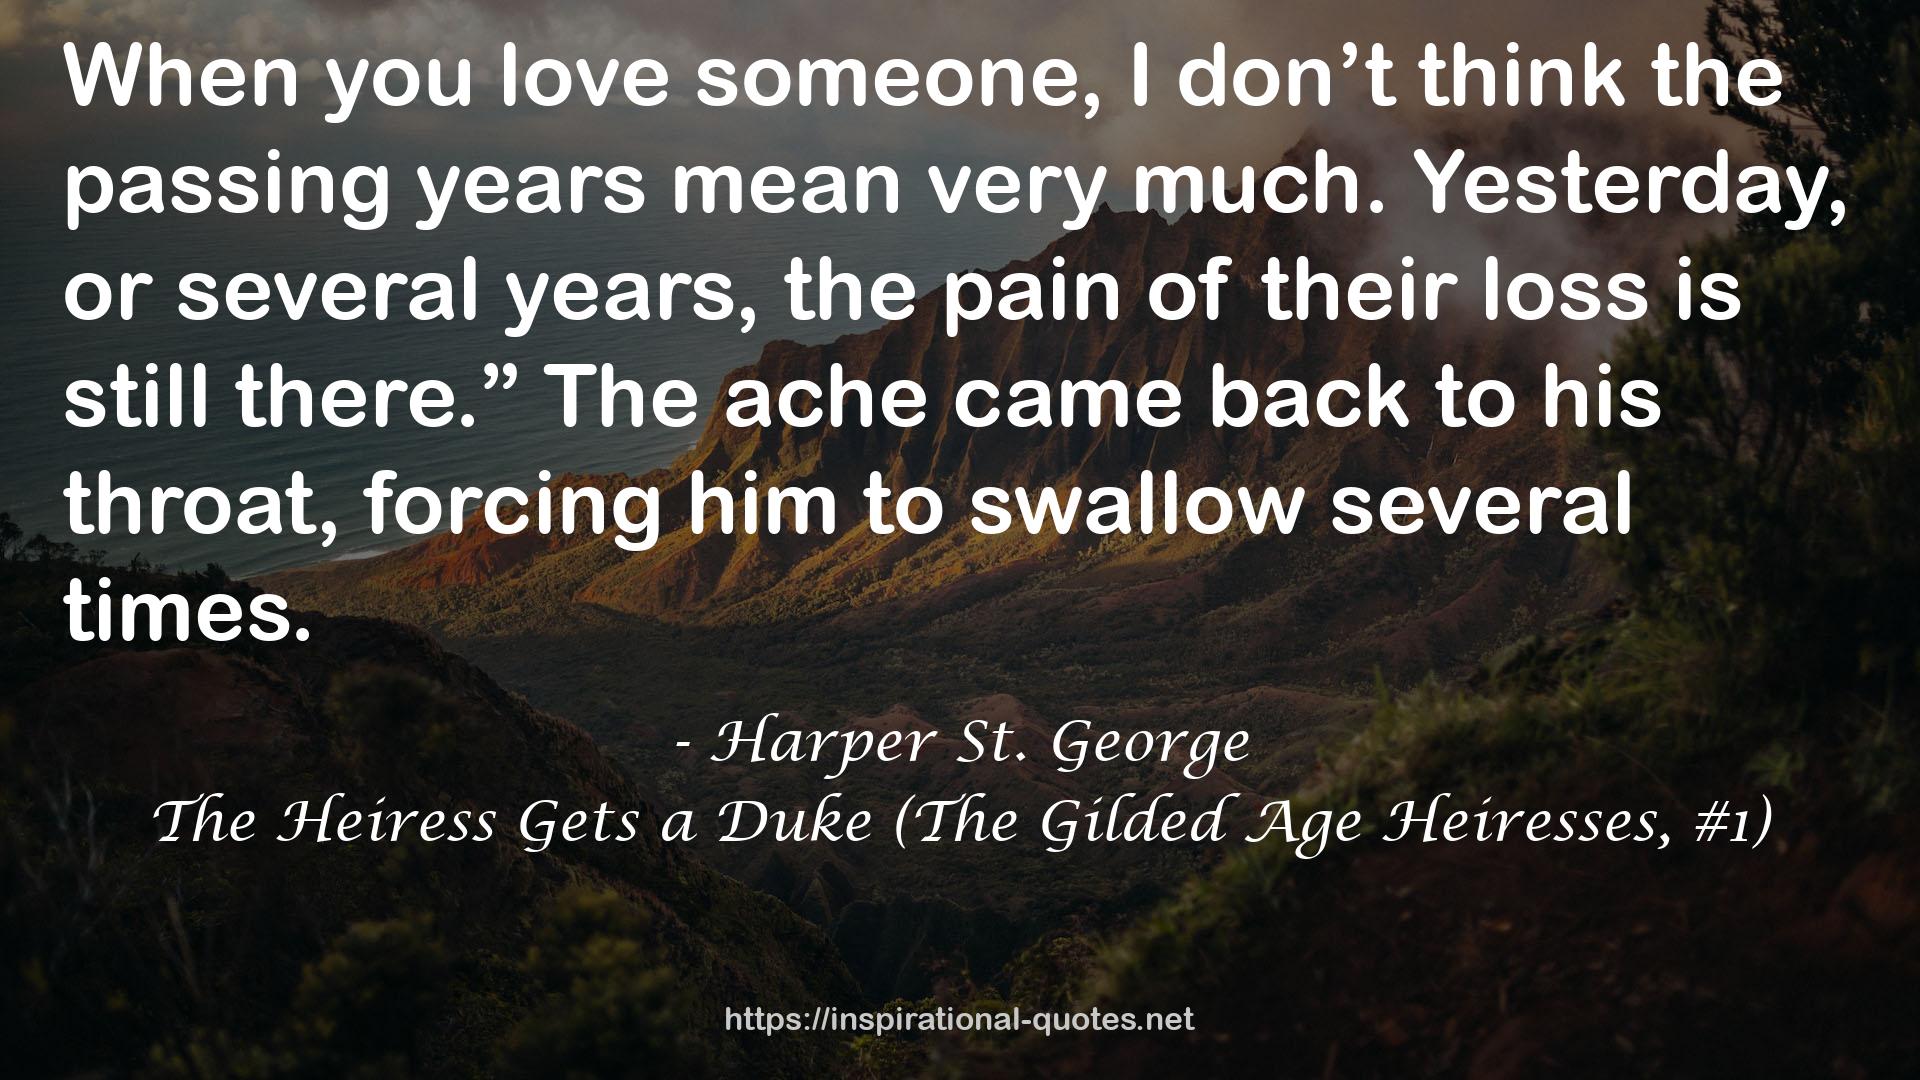 The Heiress Gets a Duke (The Gilded Age Heiresses, #1) QUOTES